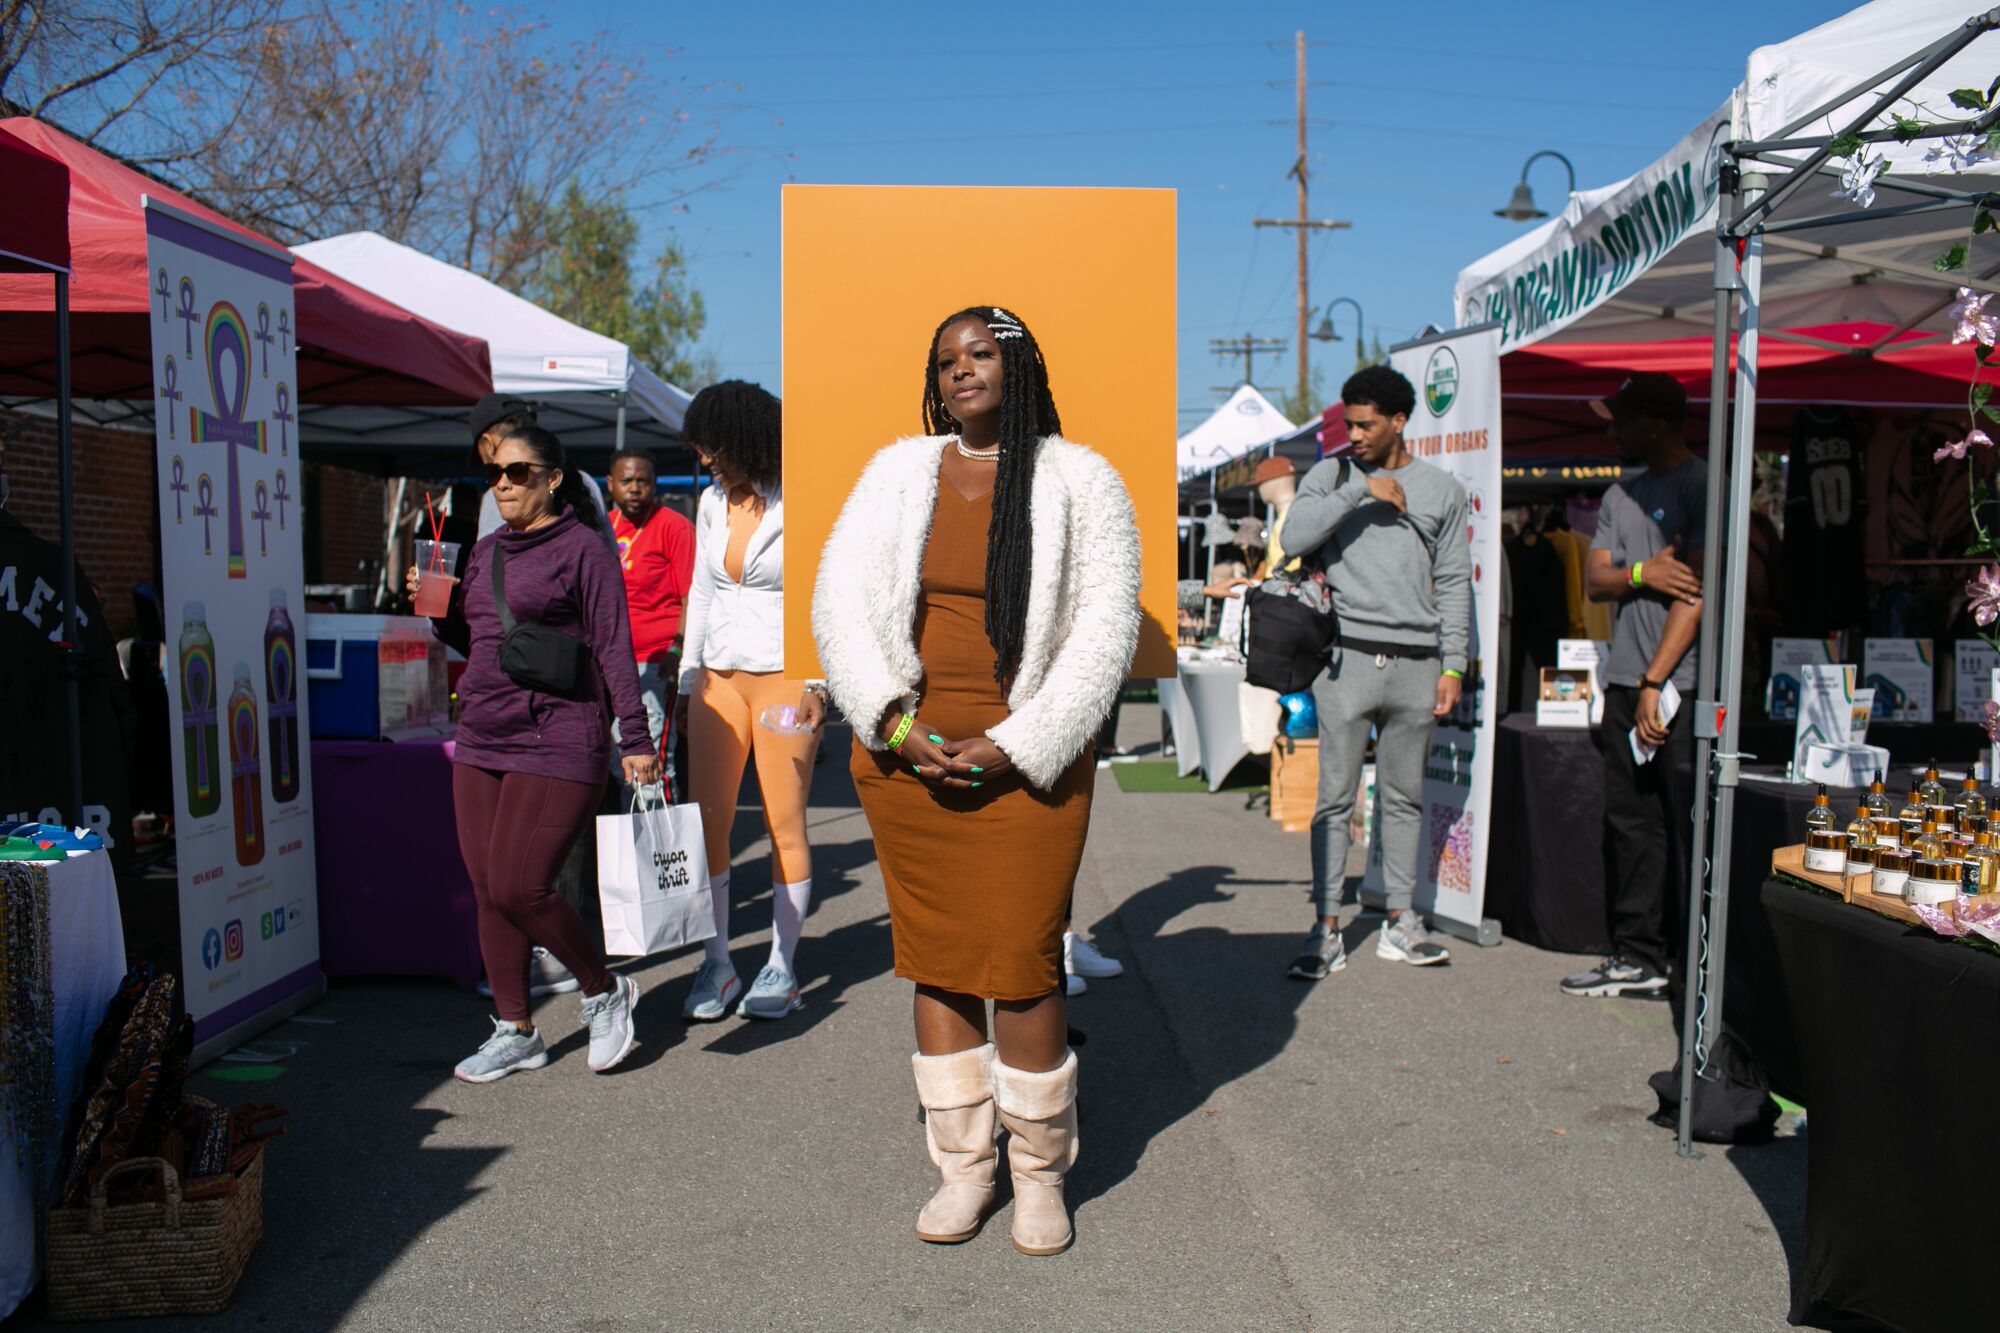 A woman in a brown dress with white boots and jacket at an outdoor market